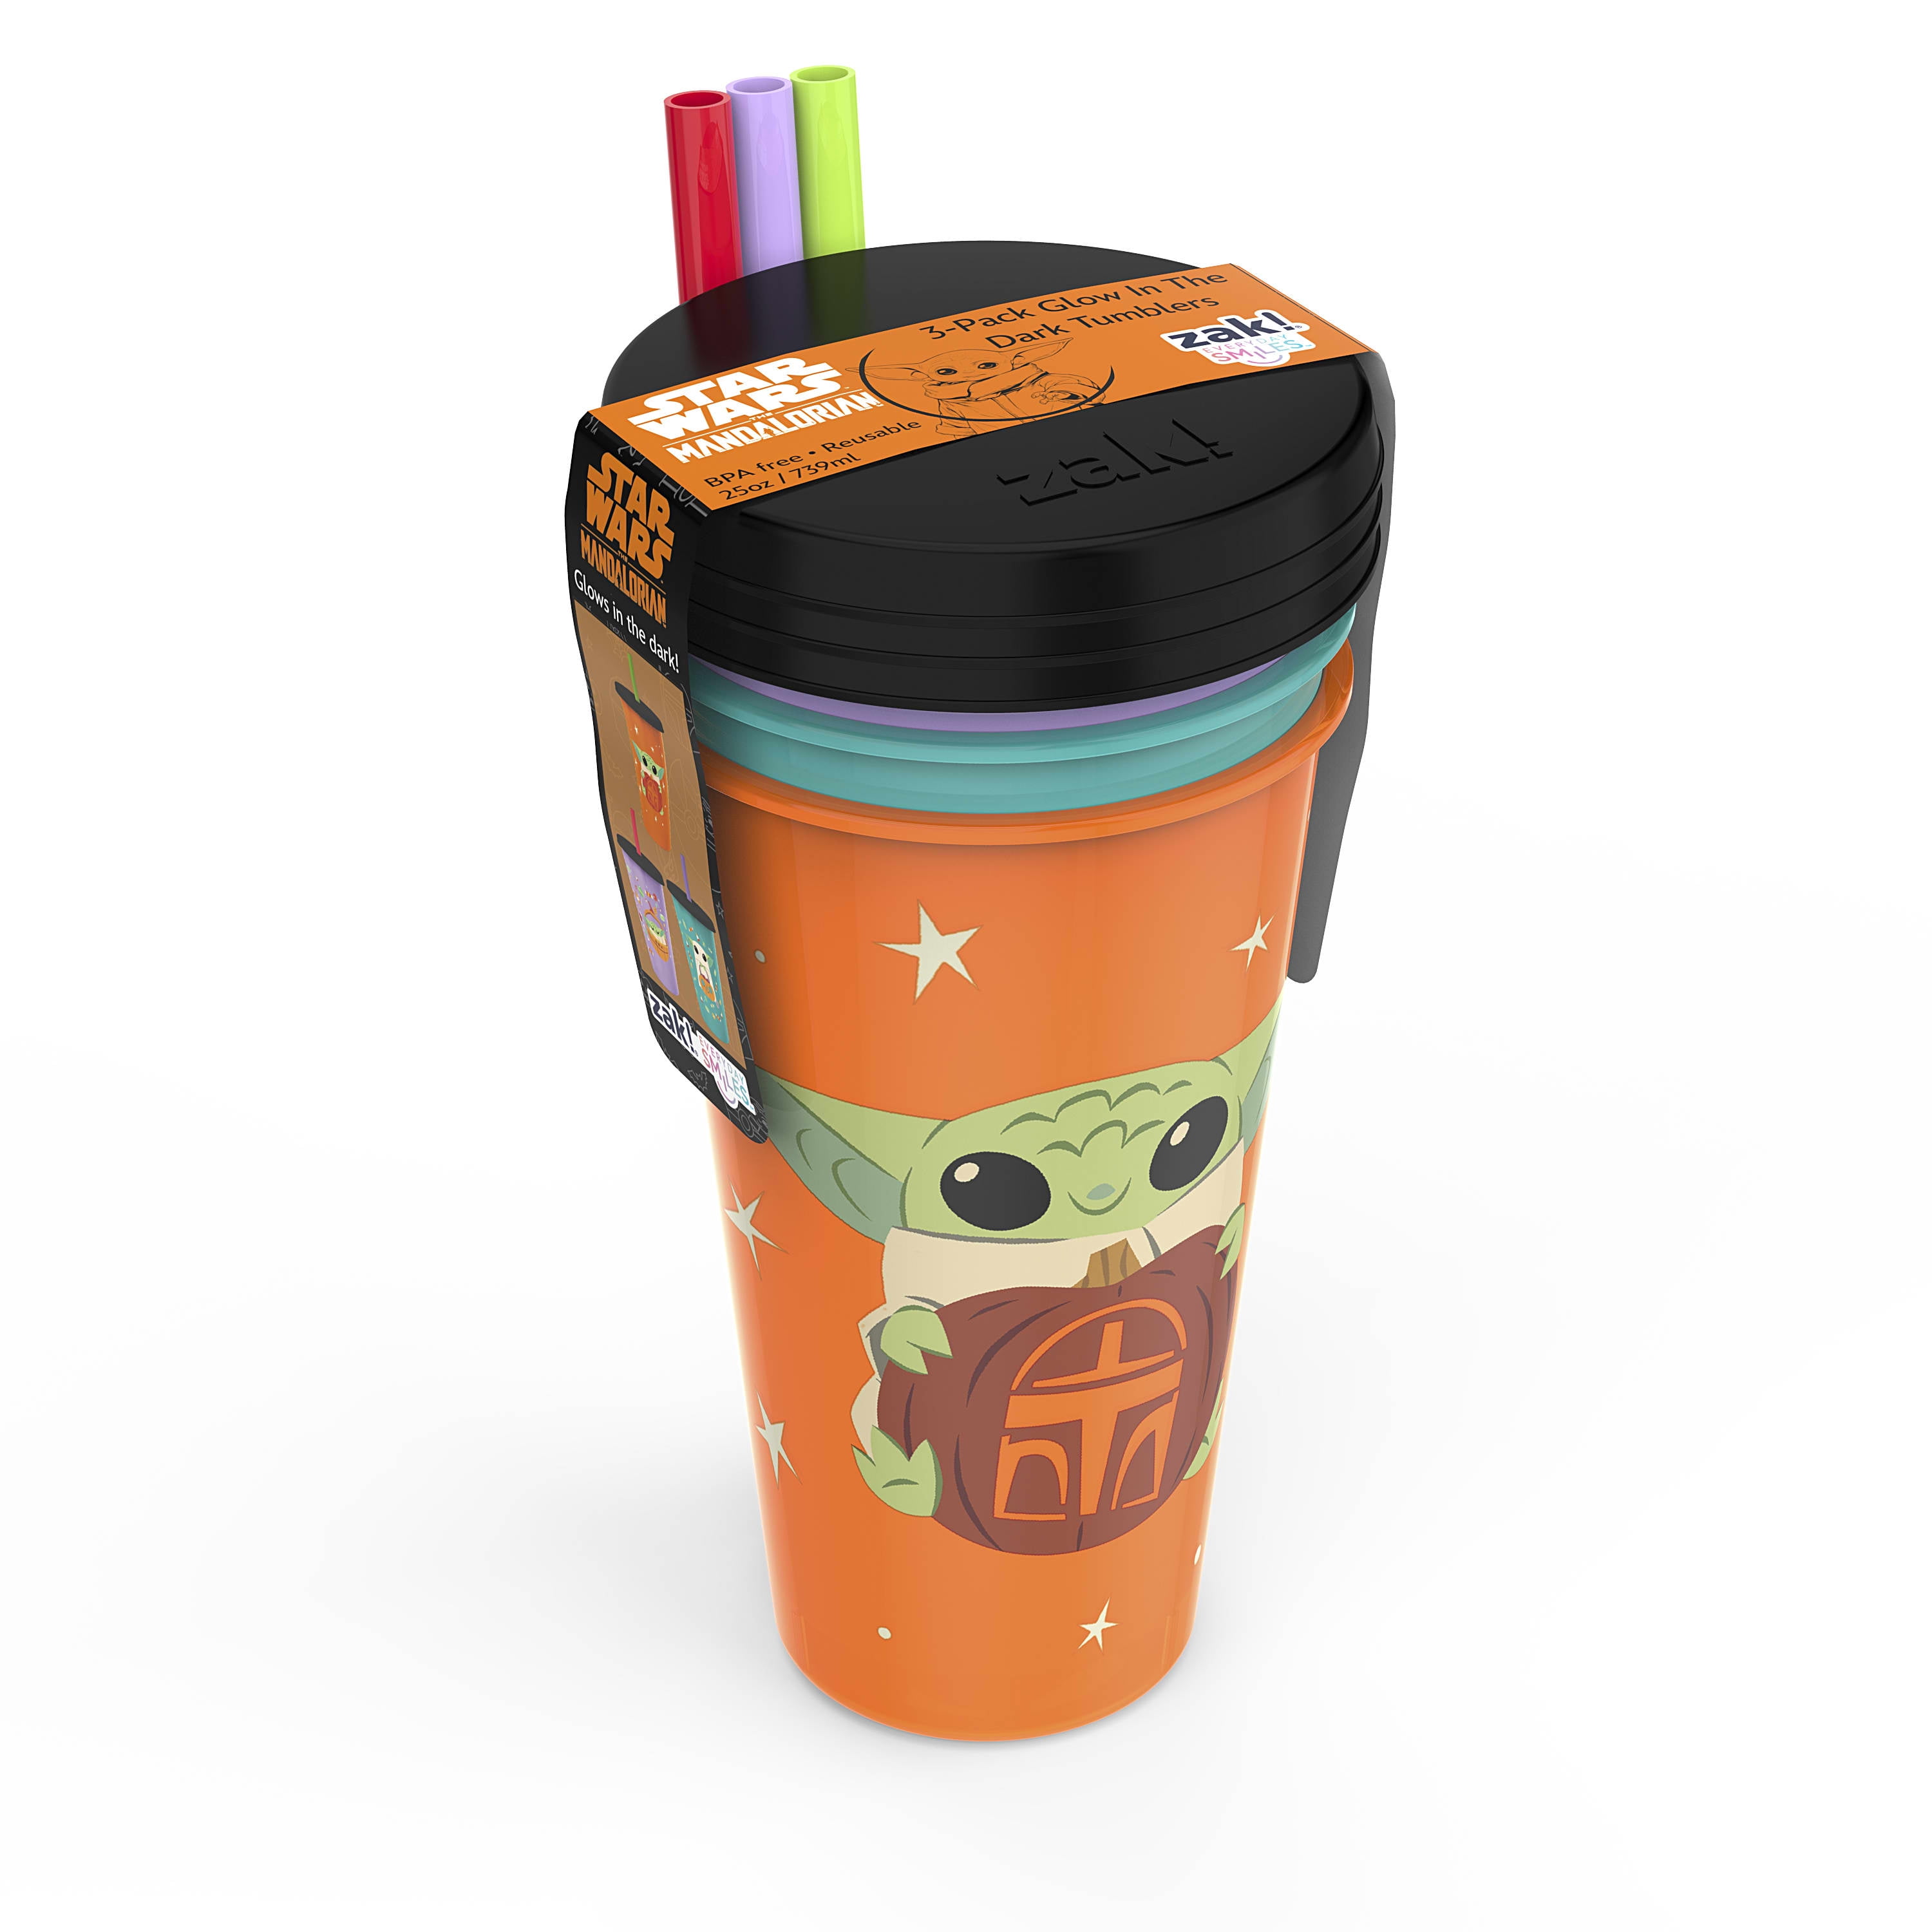  Zak Designs Star Wars The Mandalorian Kelso Toddler Cups For  Travel or At Home, 15oz 2-Pack Durable Plastic Sippy Cups With Leak-Proof  Design is Perfect For Kids (Baby Yoda, Grogu) 